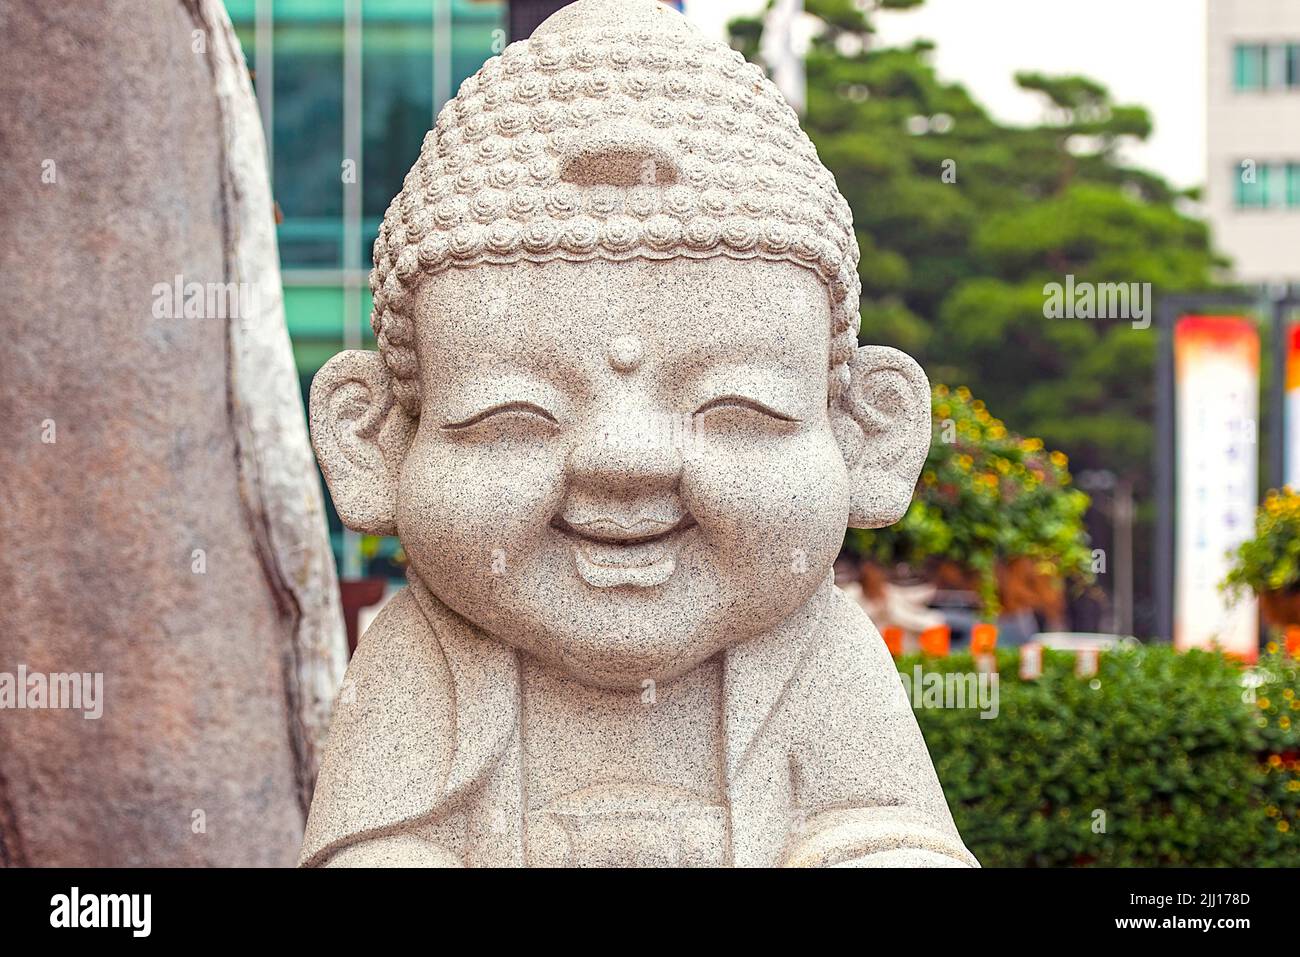 Smiling stone buddha statue at the Jogyesa temple in Seoul Stock Photo